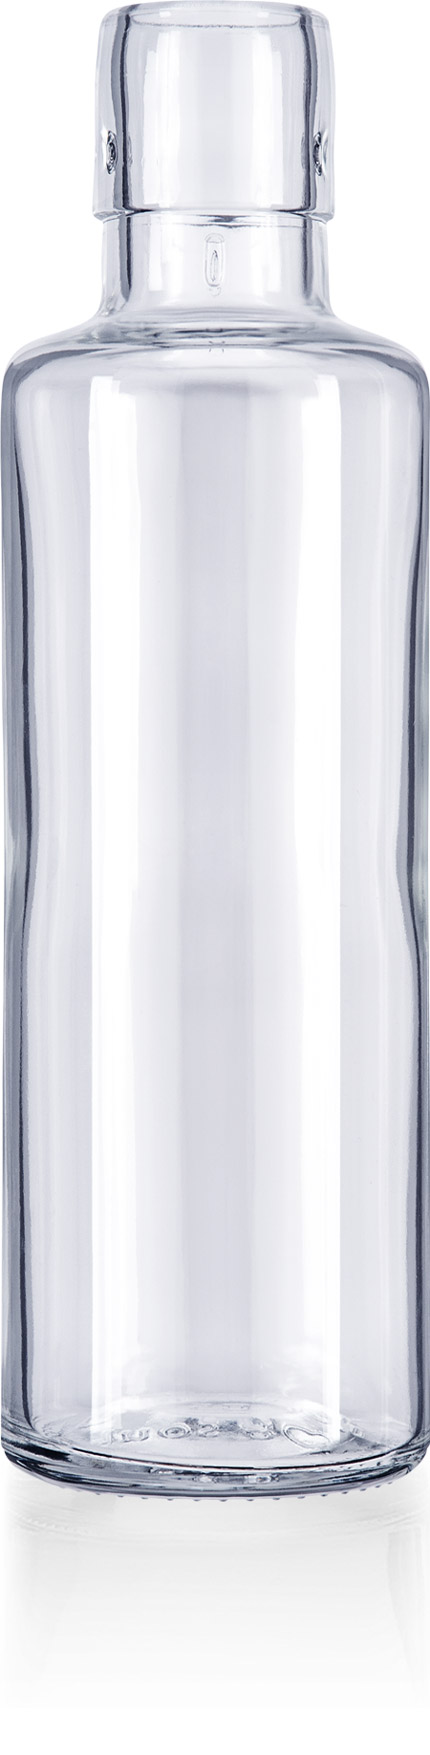 replacement bottle glass 0.6 l or 1.0 l